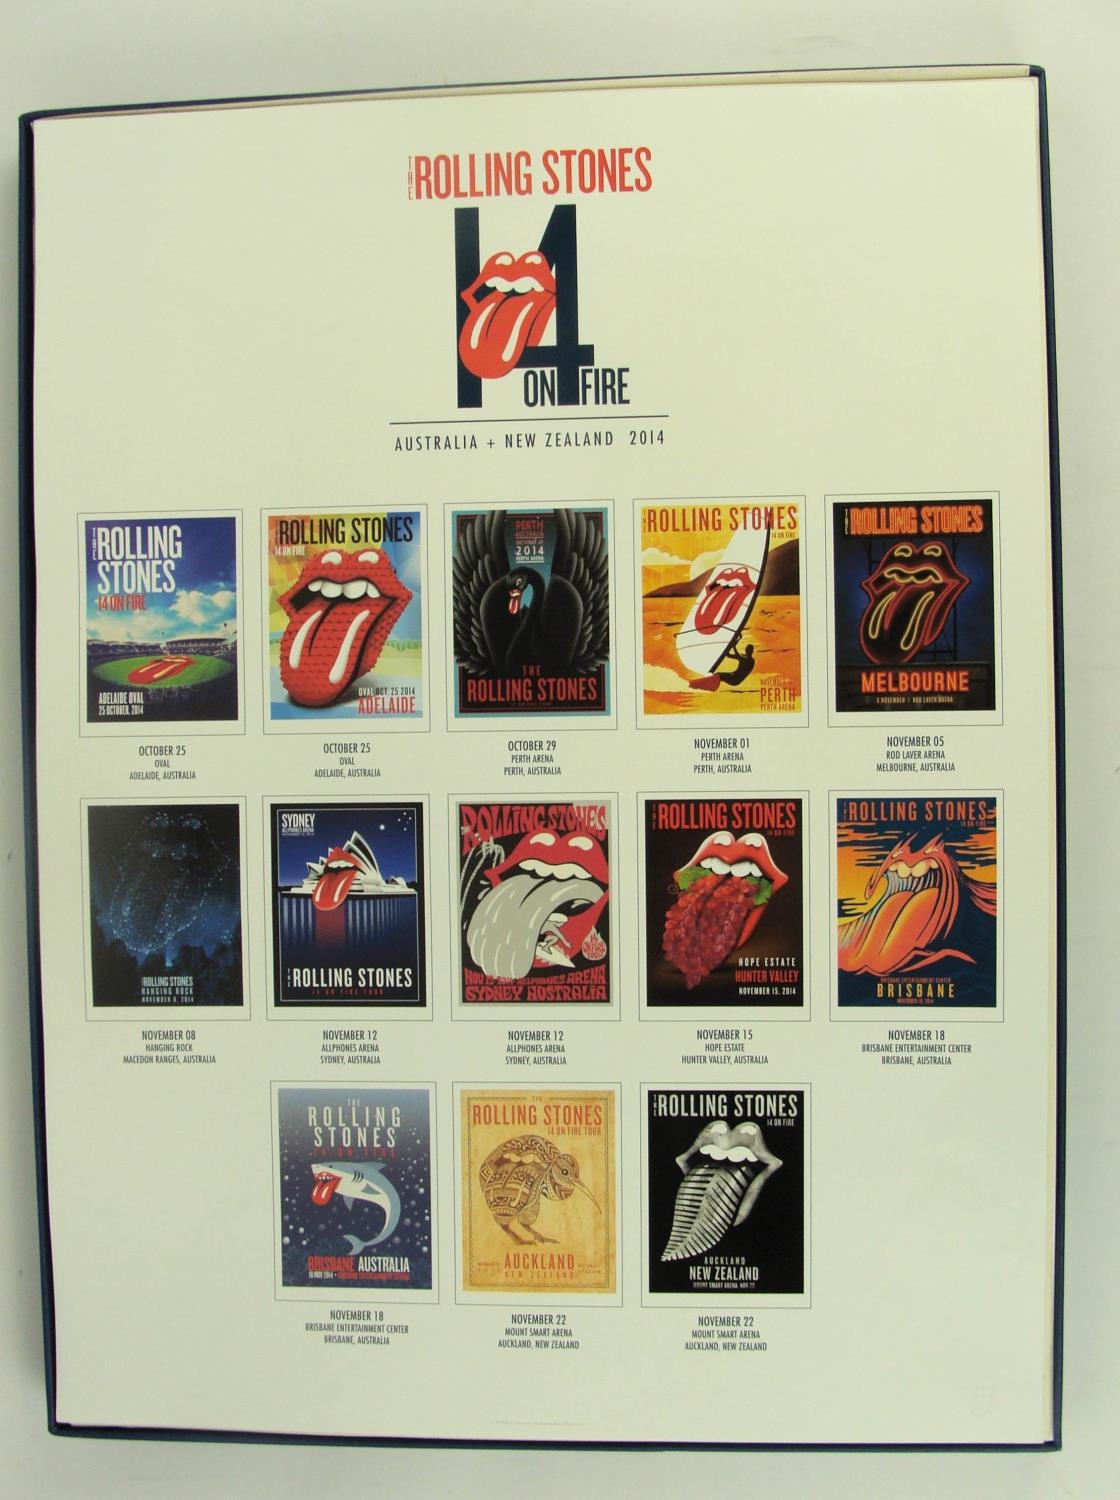 ROLLING STONES '14 on FIRE' BOX SET, of 13 lithographic posters from the 2014 Australia and New